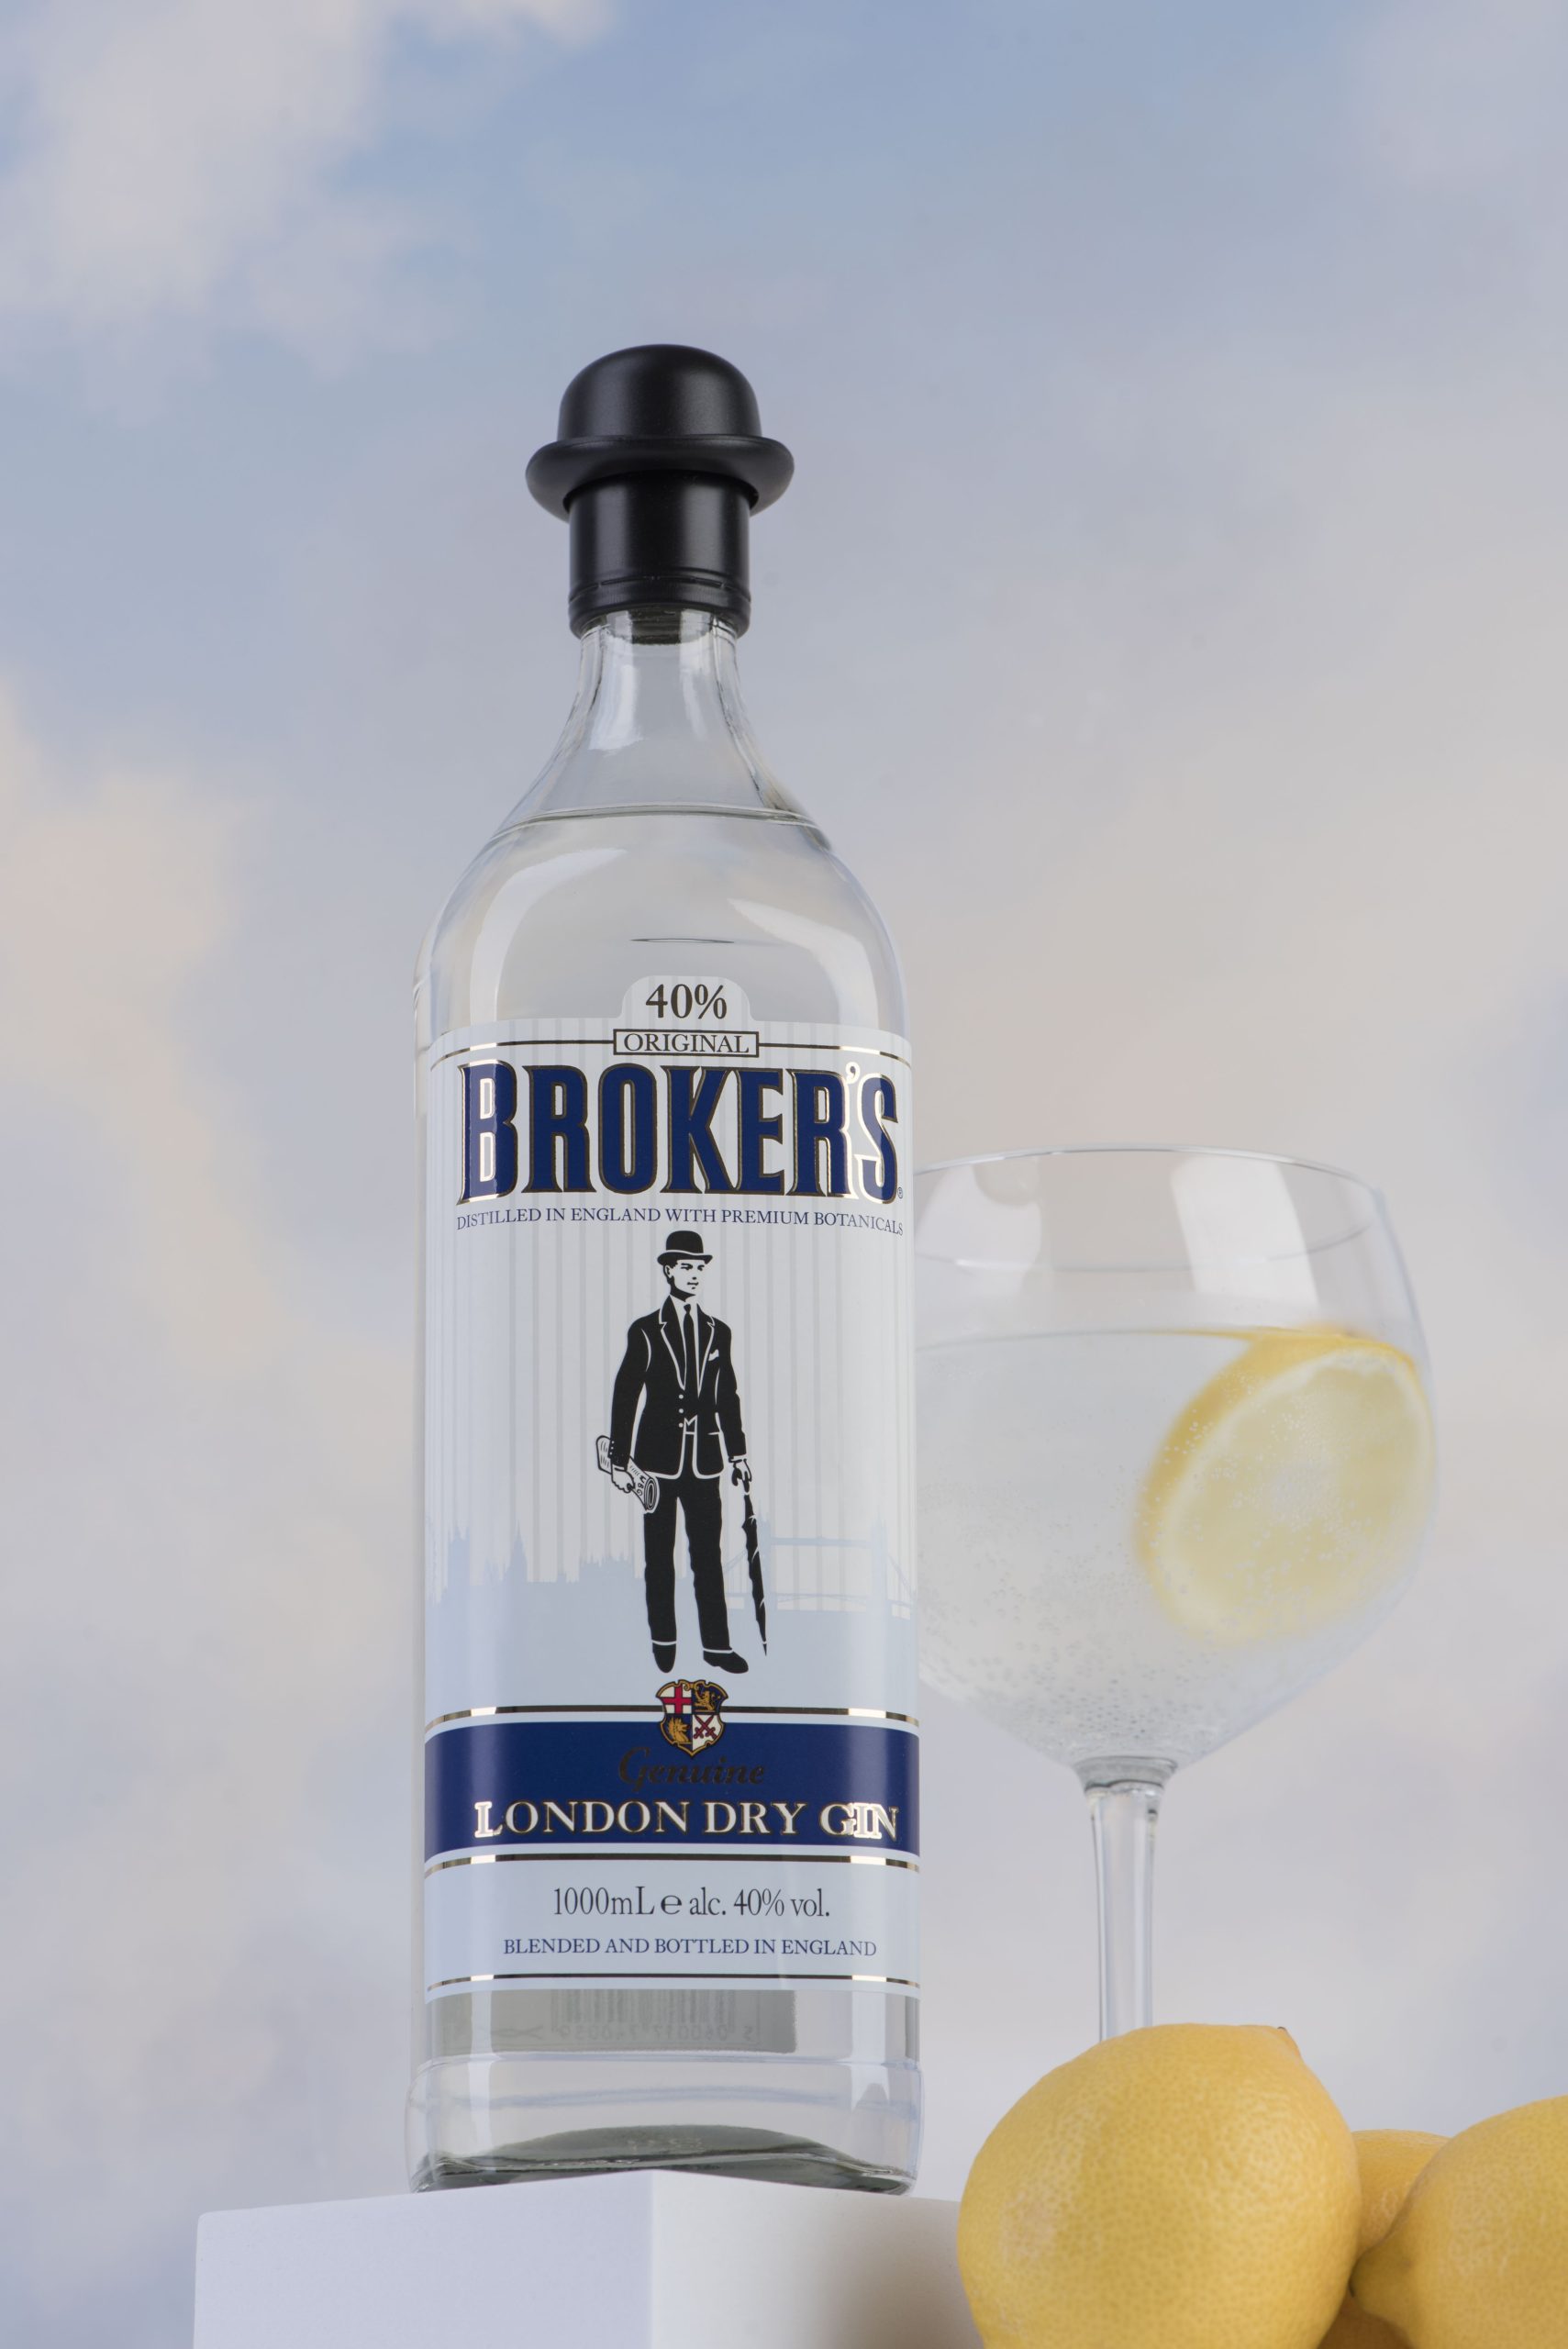 Borker's Gin and Tonic